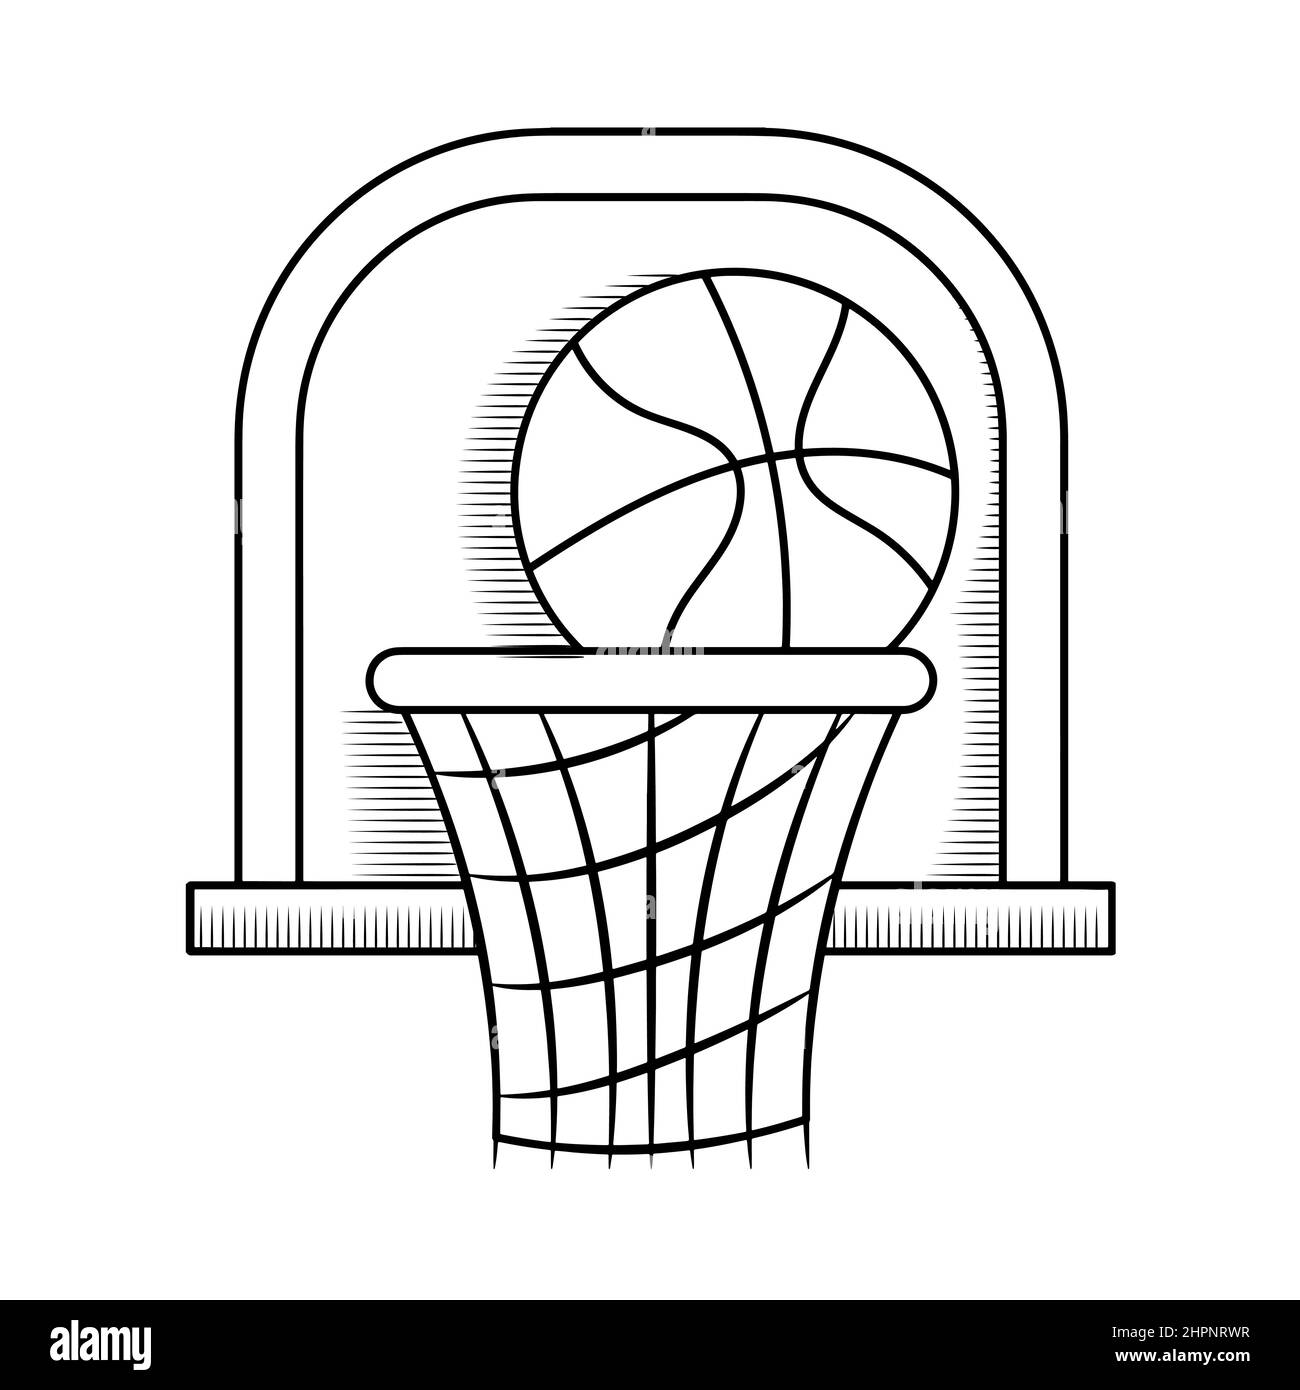 Basketball hand drawn doodle illustration with outline design Stock Vector